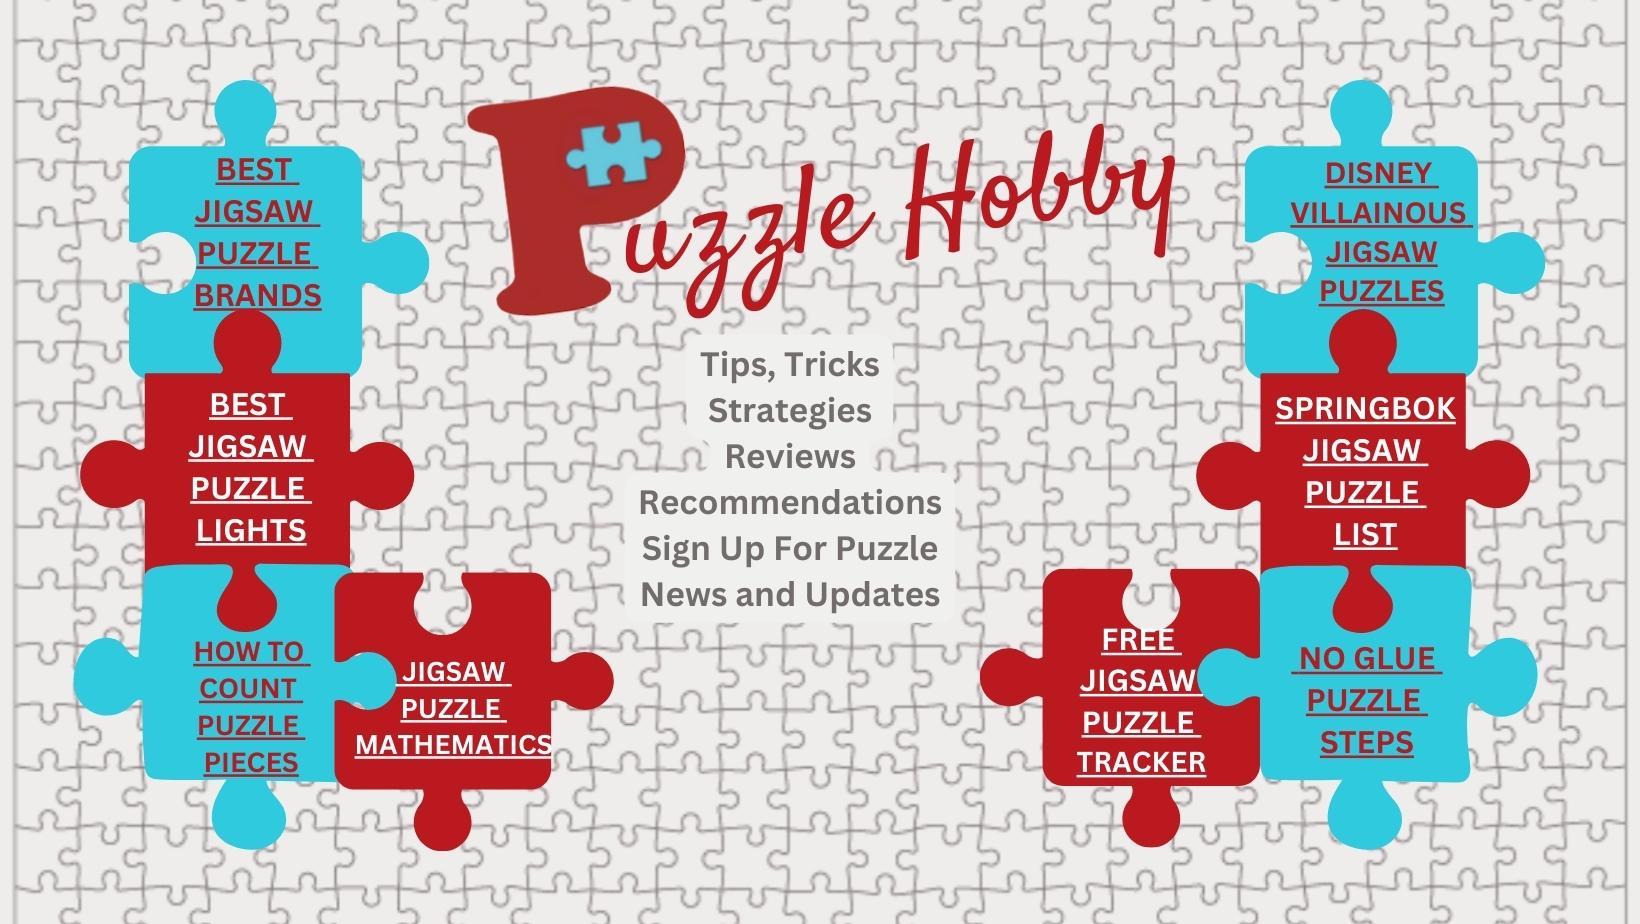 All Things Coca Cola Jigsaw Puzzle